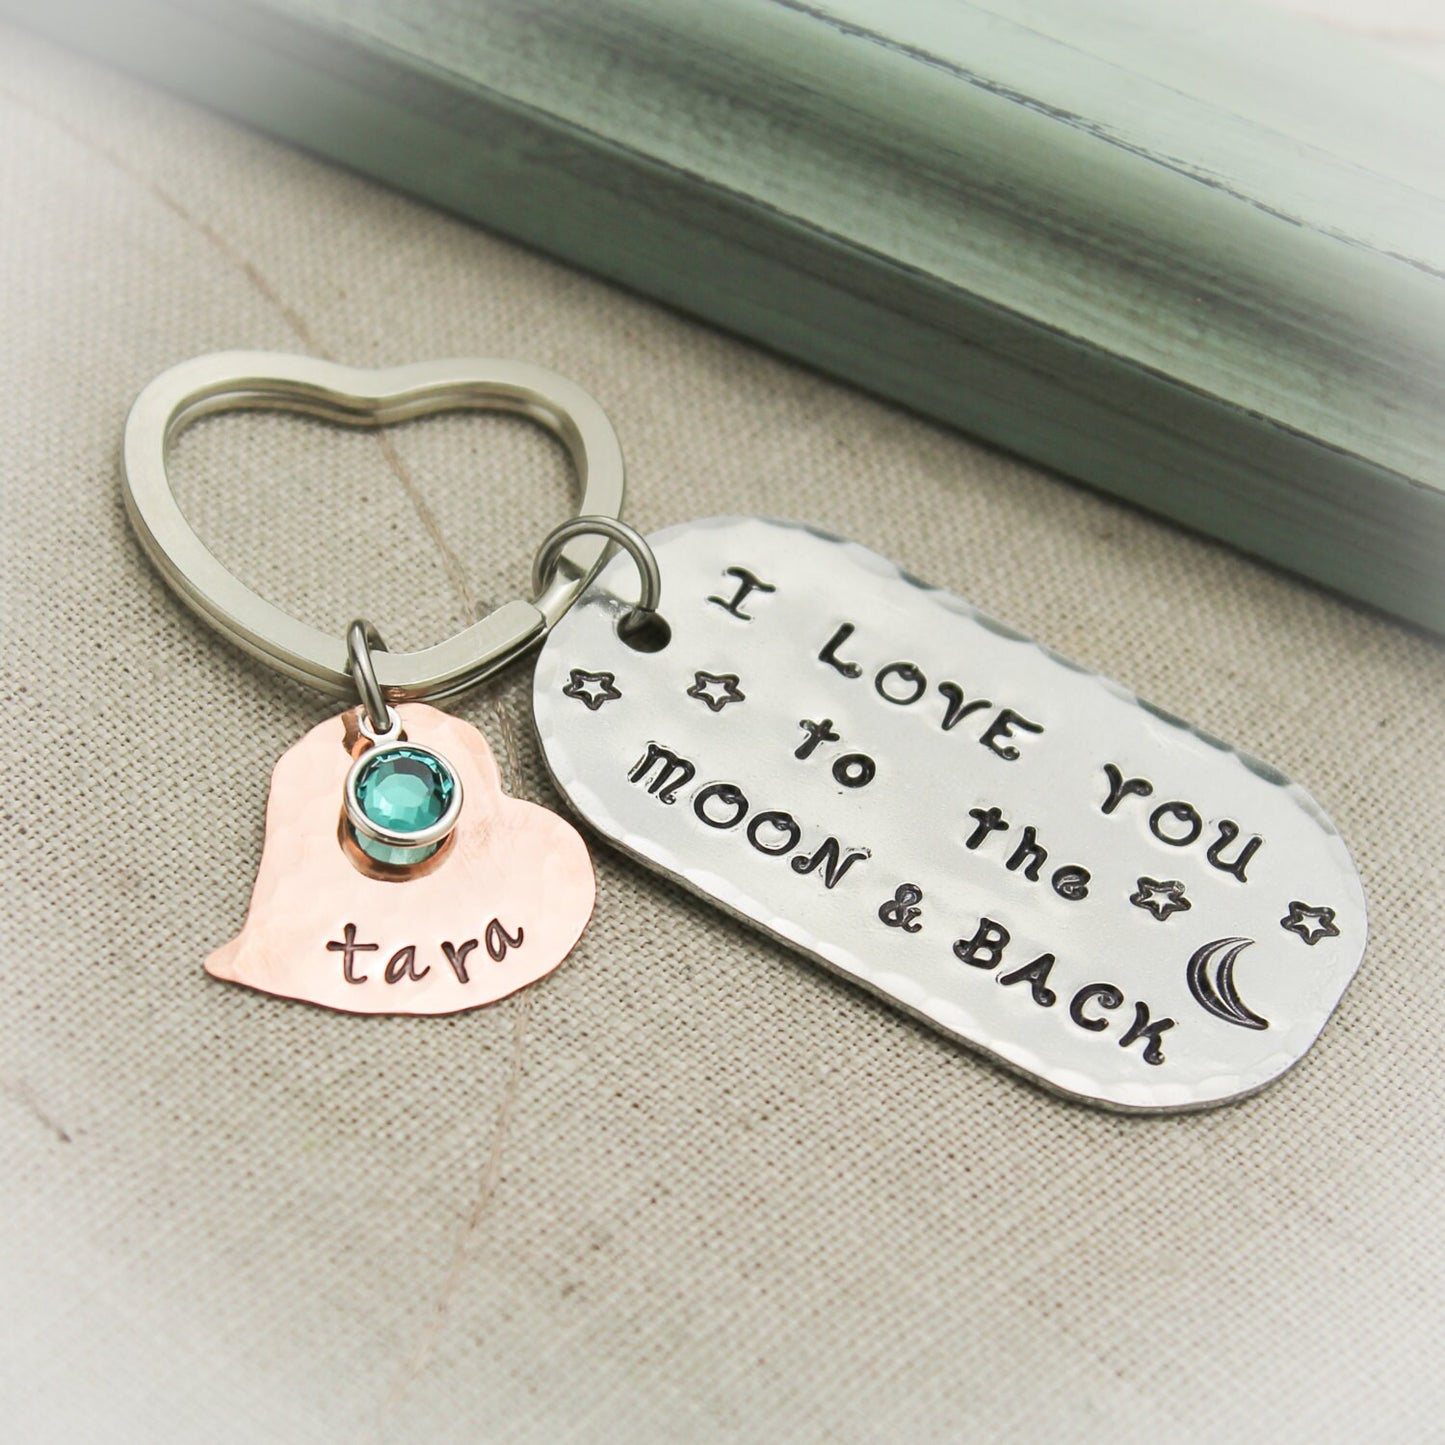 I LOVE you to the MOON and Back Key Chain Hand Stamped Personalized Aluminum and Copper Key Chain Hand Stamped Personalized Key Chain